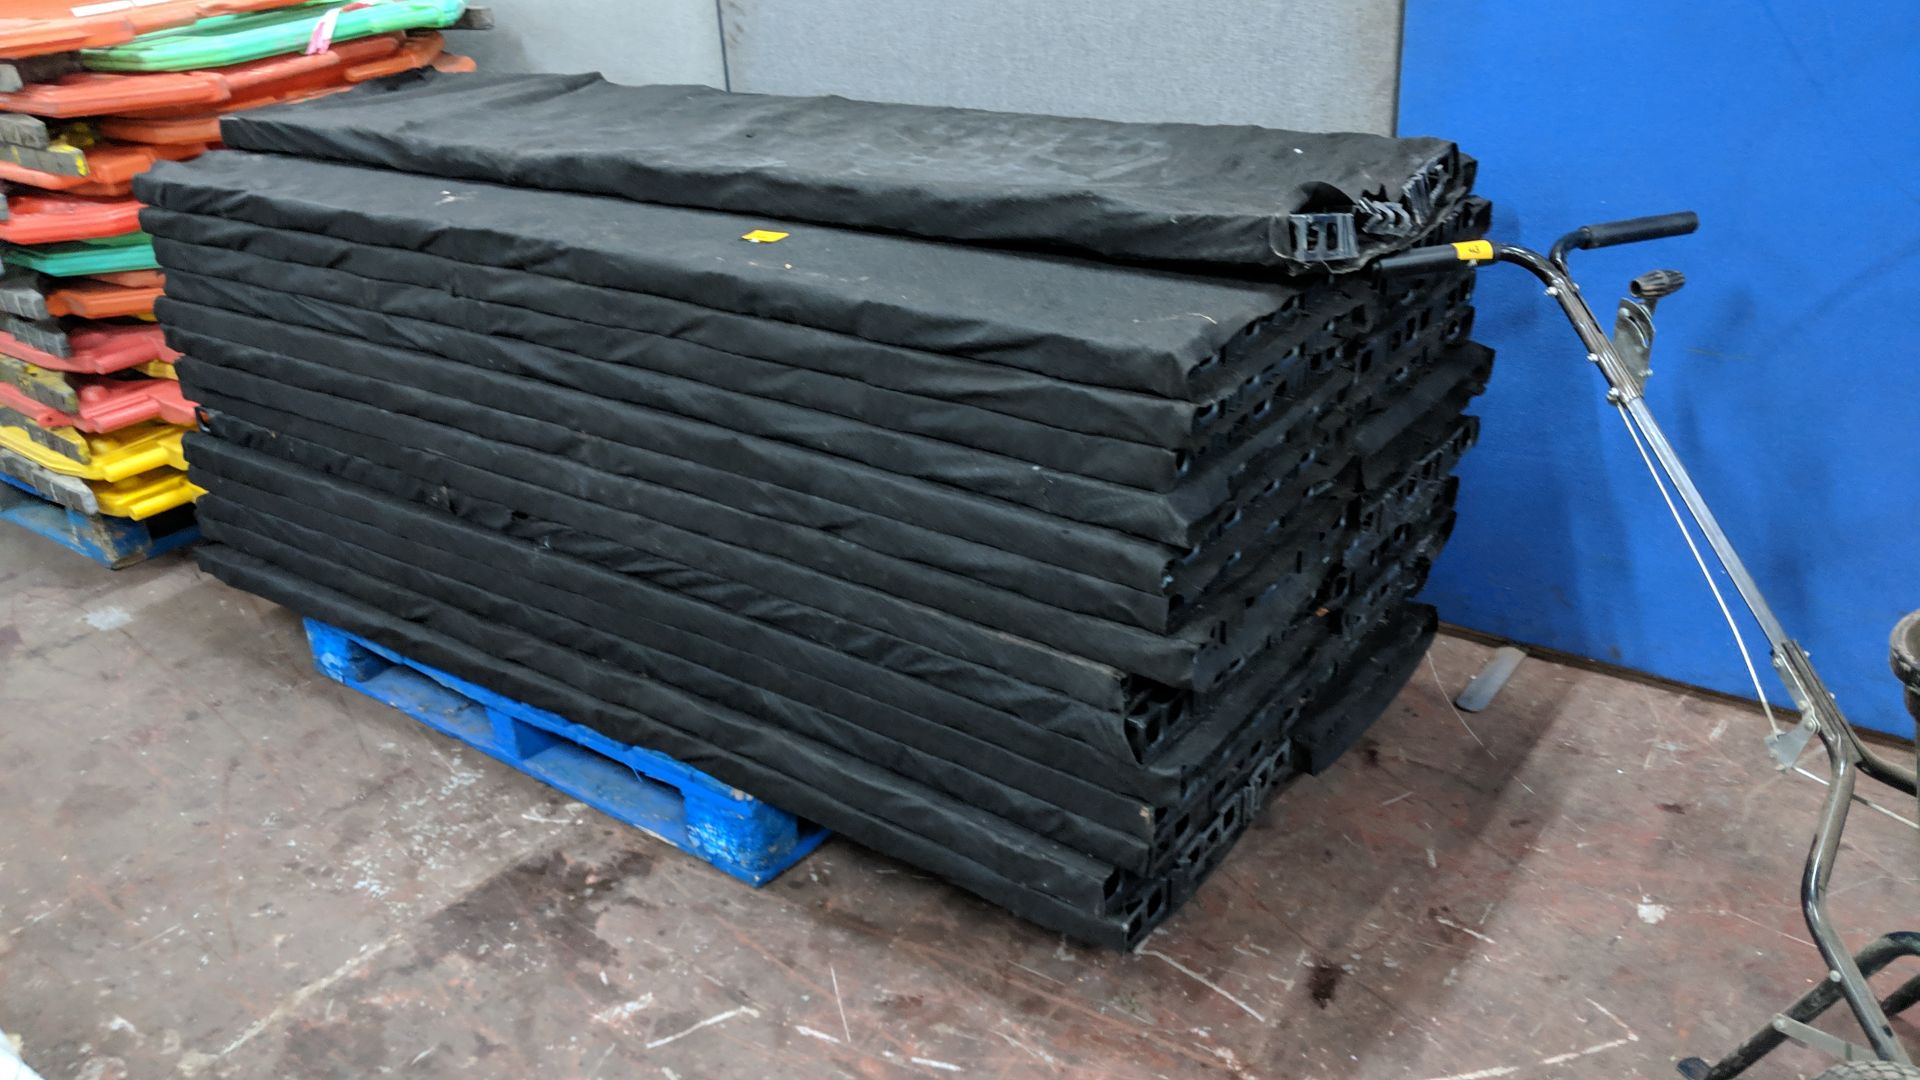 Quantity of Drain Deck - approx. 28 pieces IMPORTANT: Please remember goods successfully bid upon